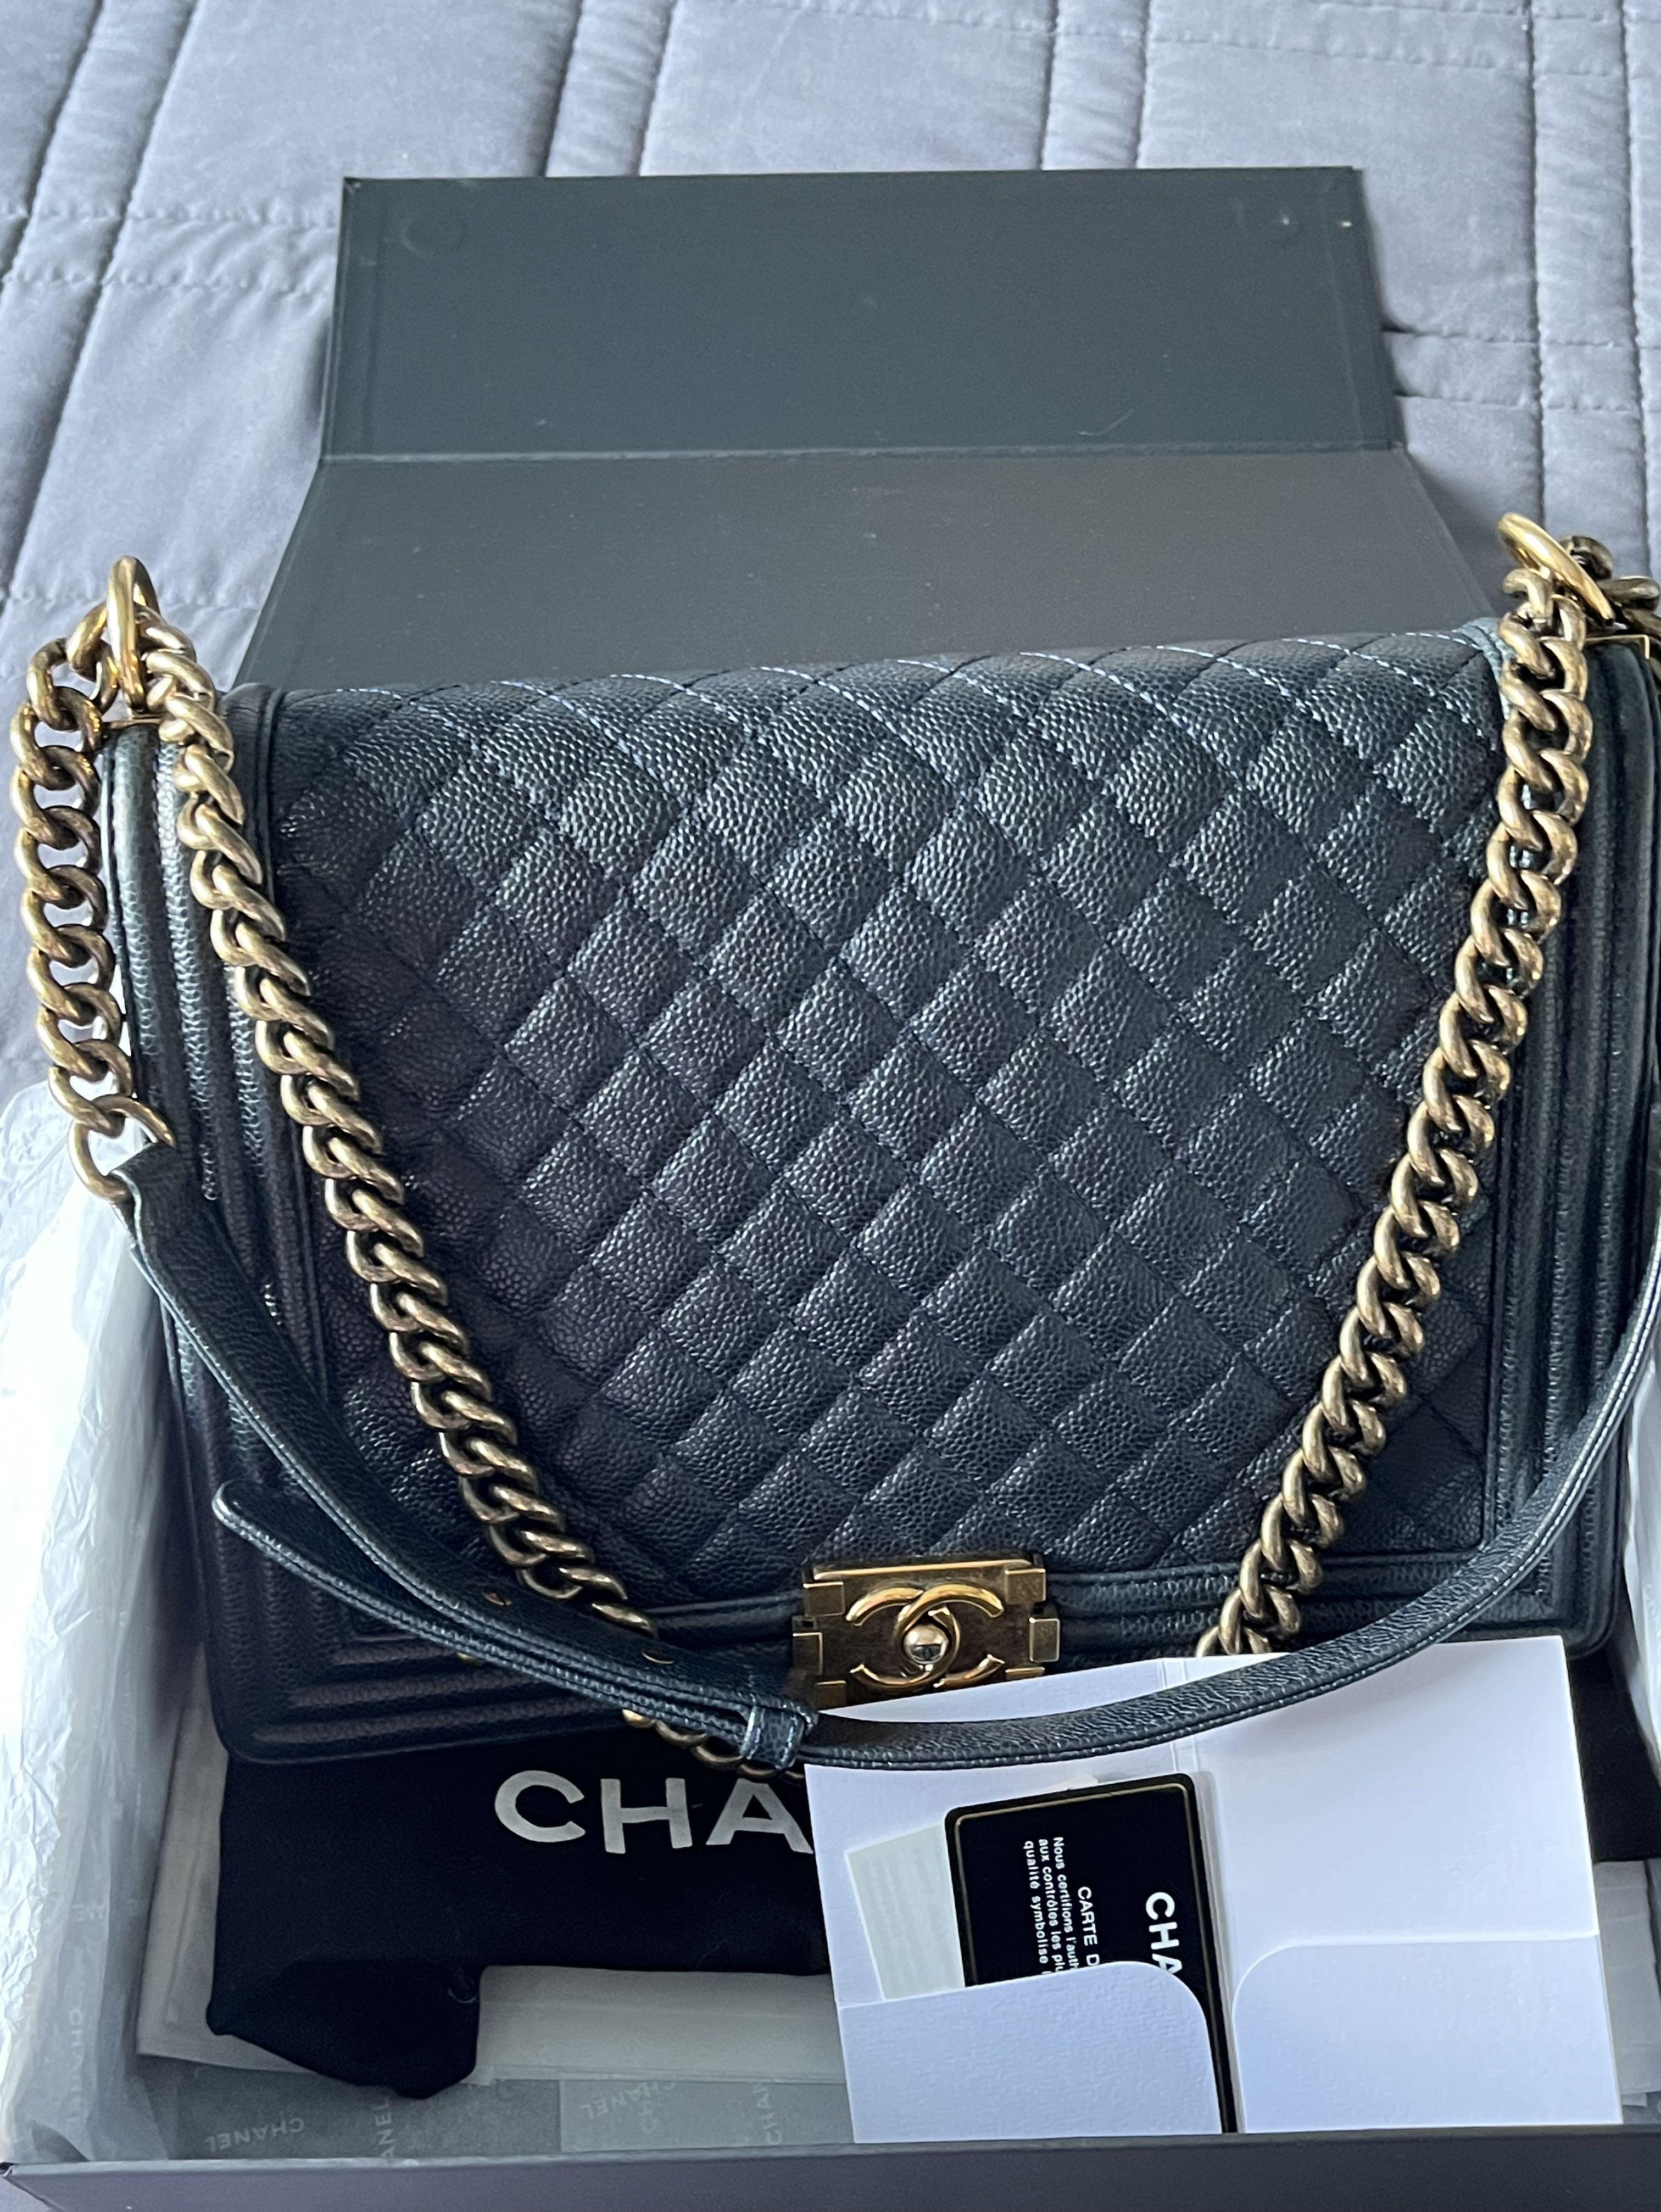 Delux Bagz  Chanel boy old medium in navy blue lambskin with ghw  preloved excellent condition comes with box dust bag authentic card and  receipt serial 22 price RM 12xxx deluxpreloveddeluxchanel 